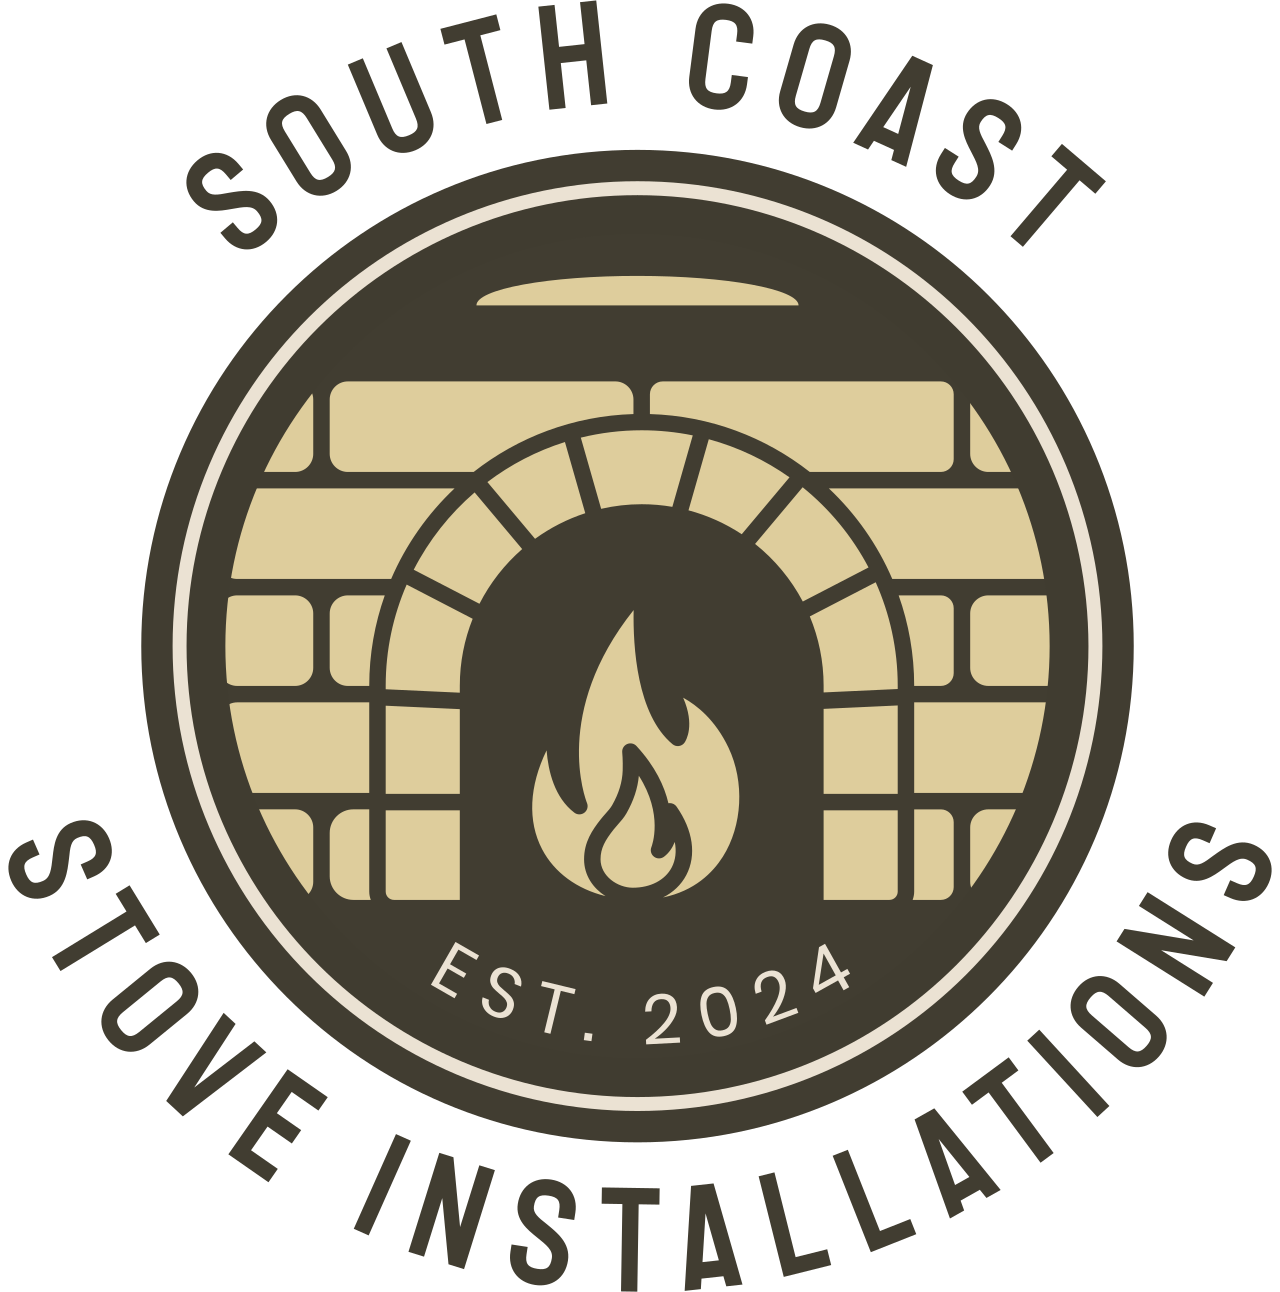  South coast  stoves installations East Sussex 's logo